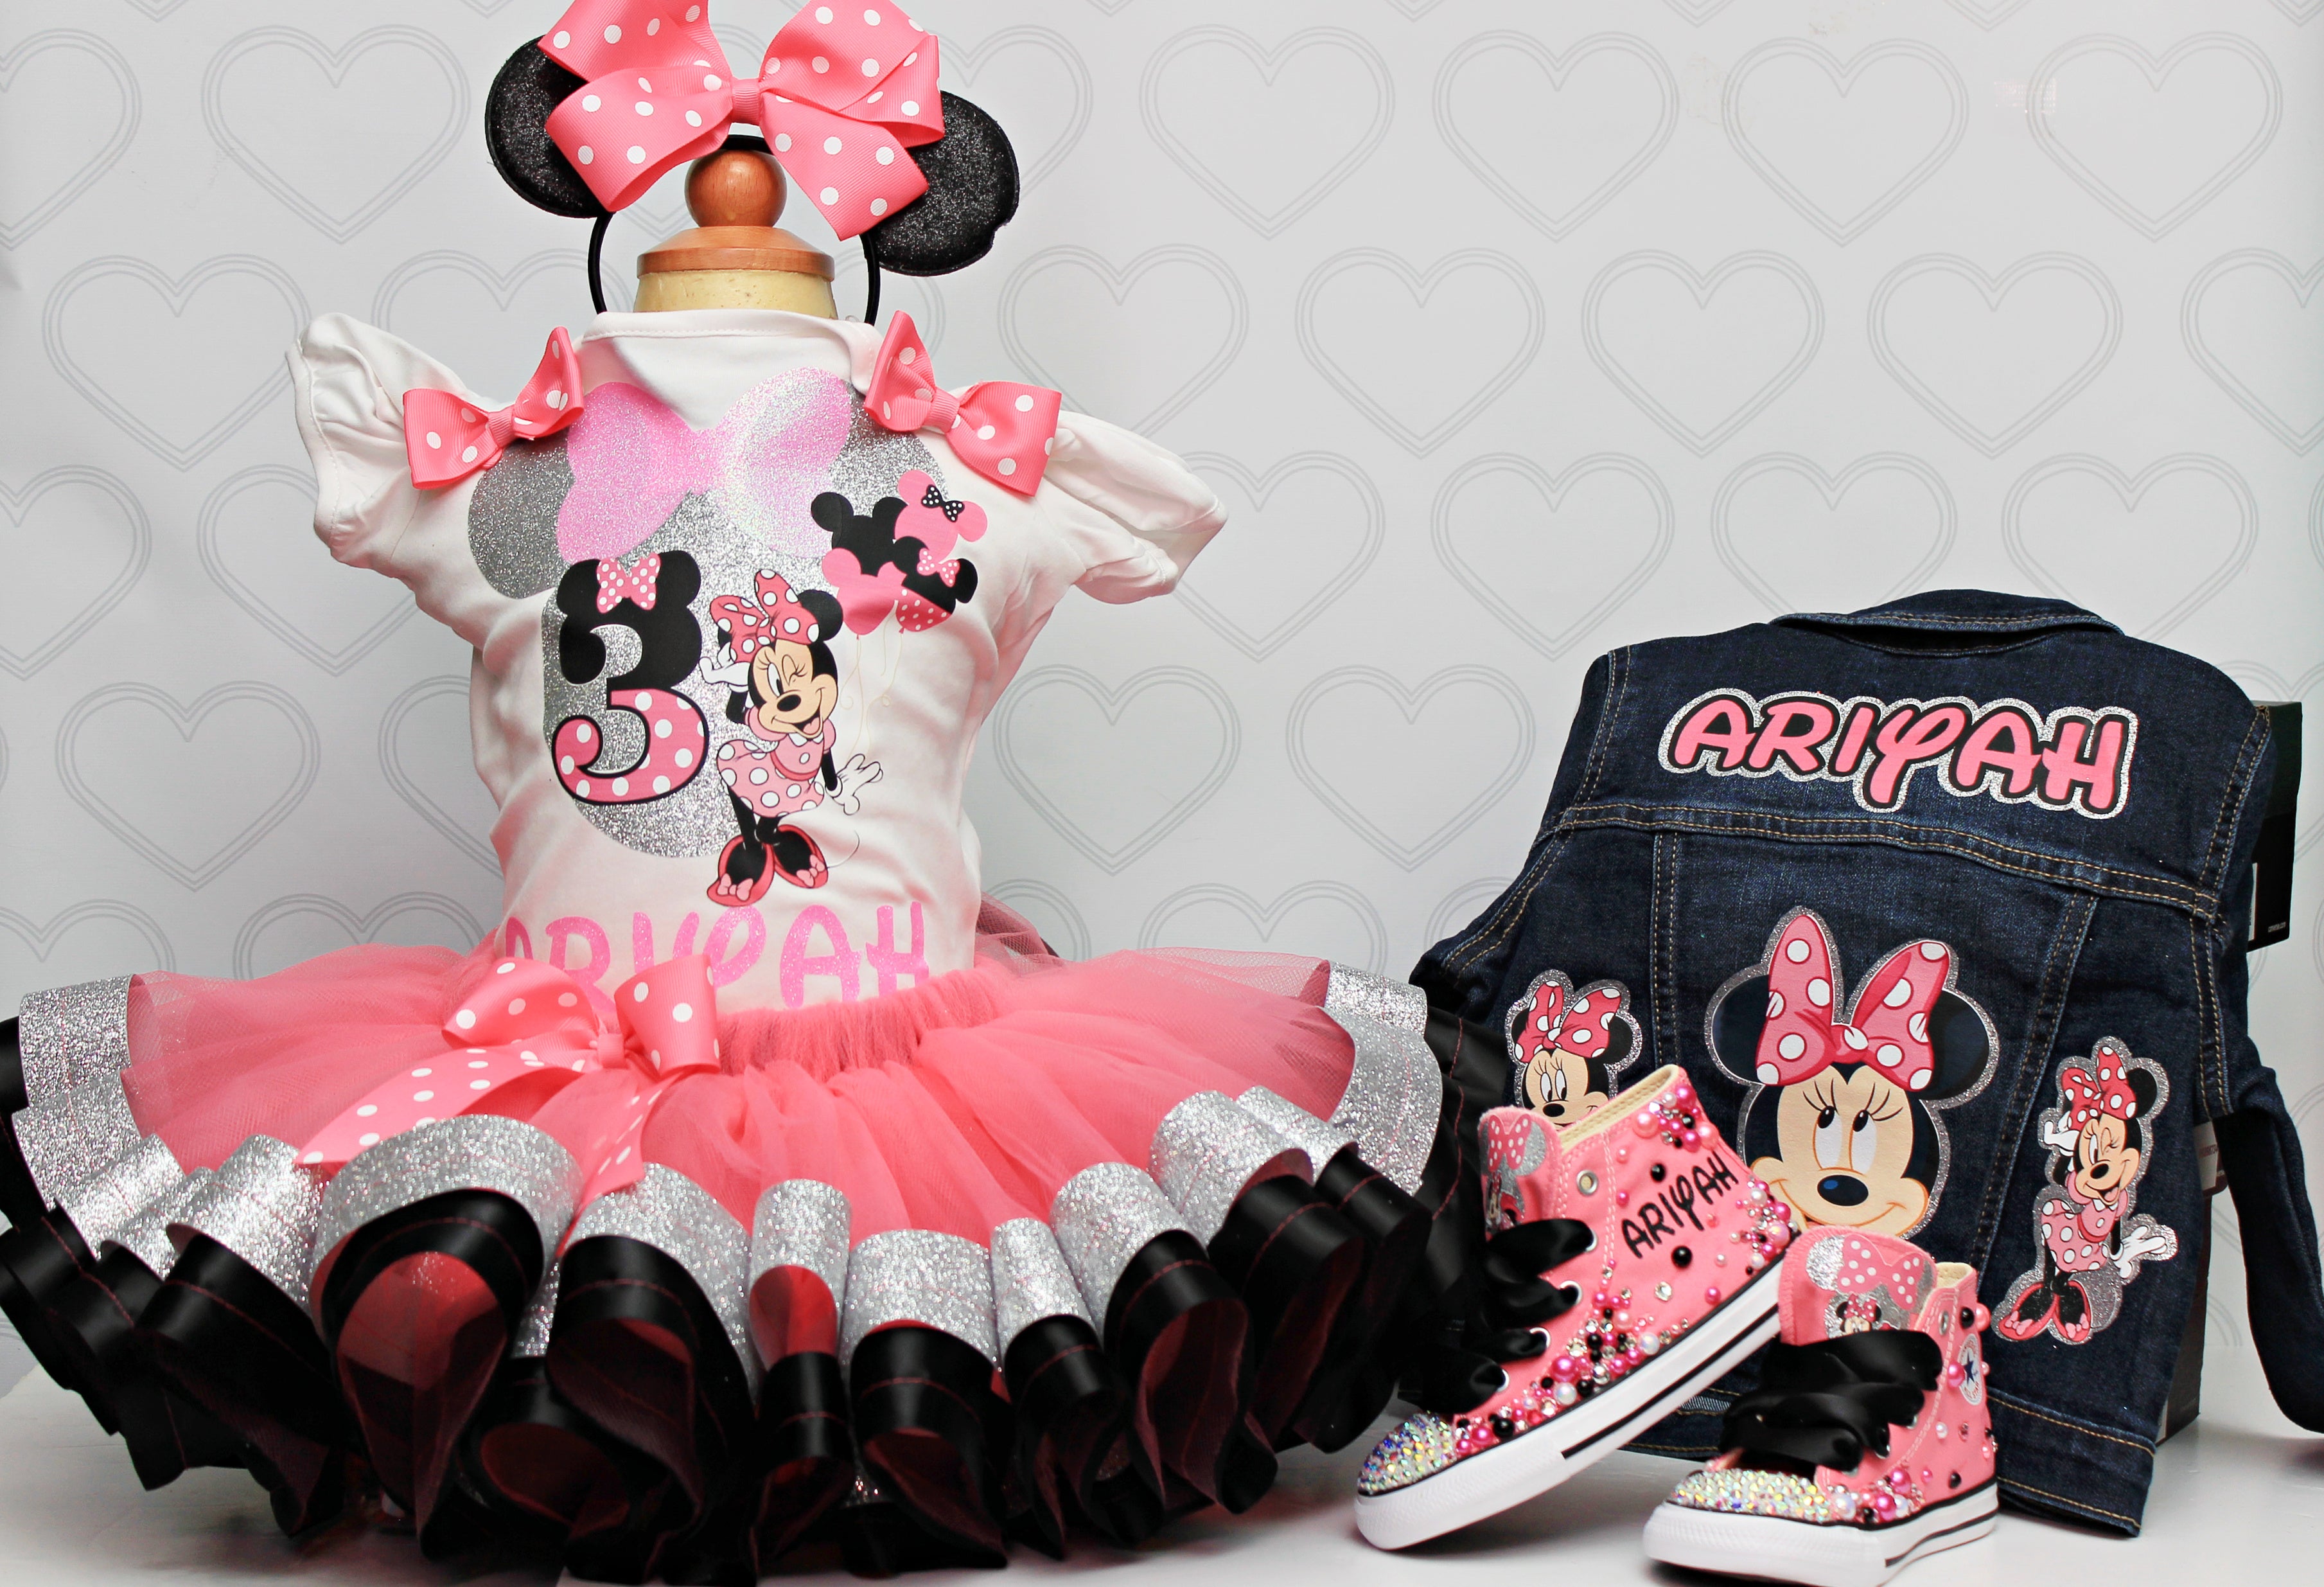 Mouse tutu set- Mouse outfit-Mouse birthday outfit